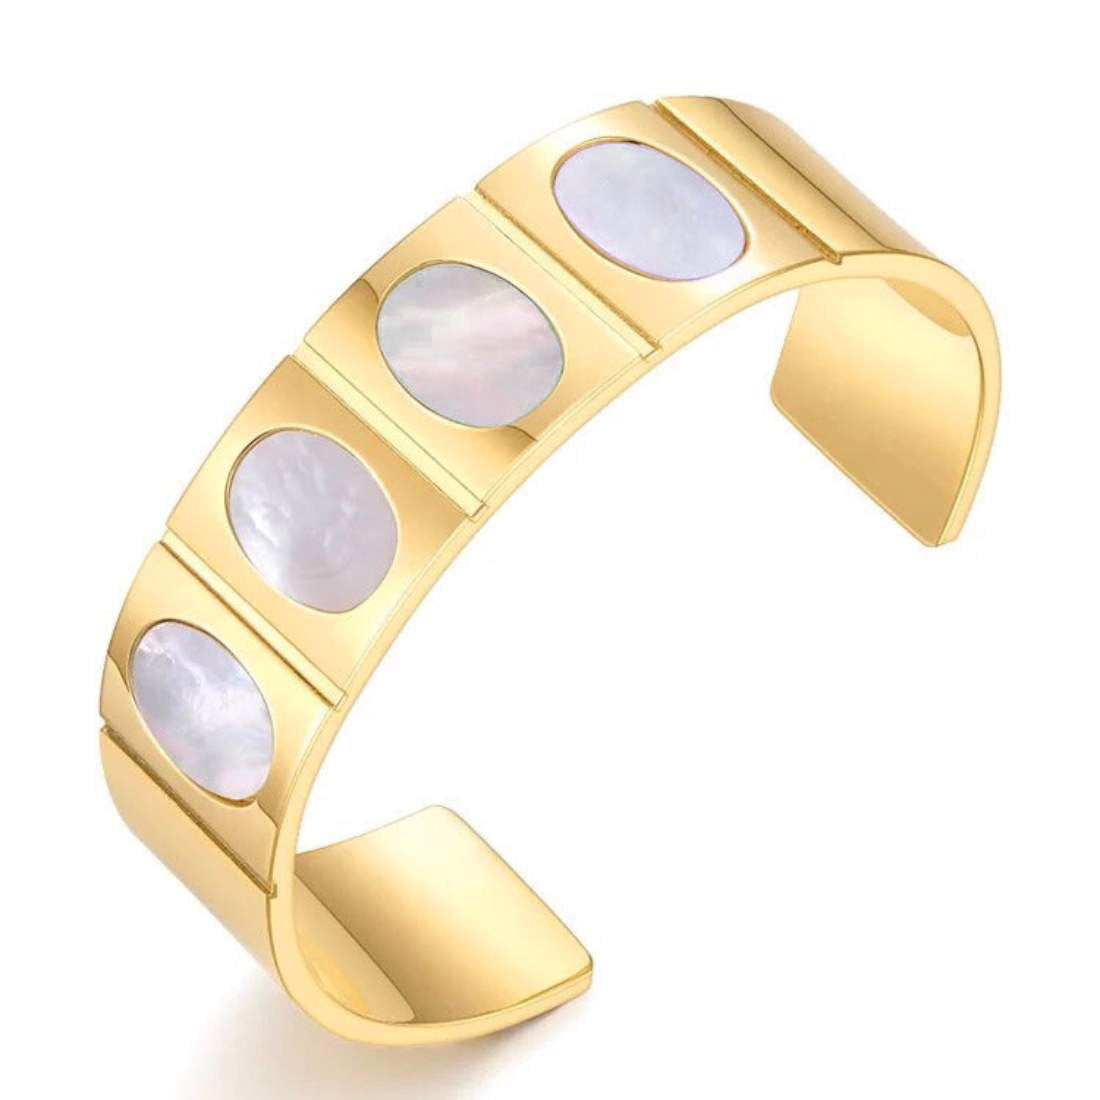 Gold and Pearl Cuff